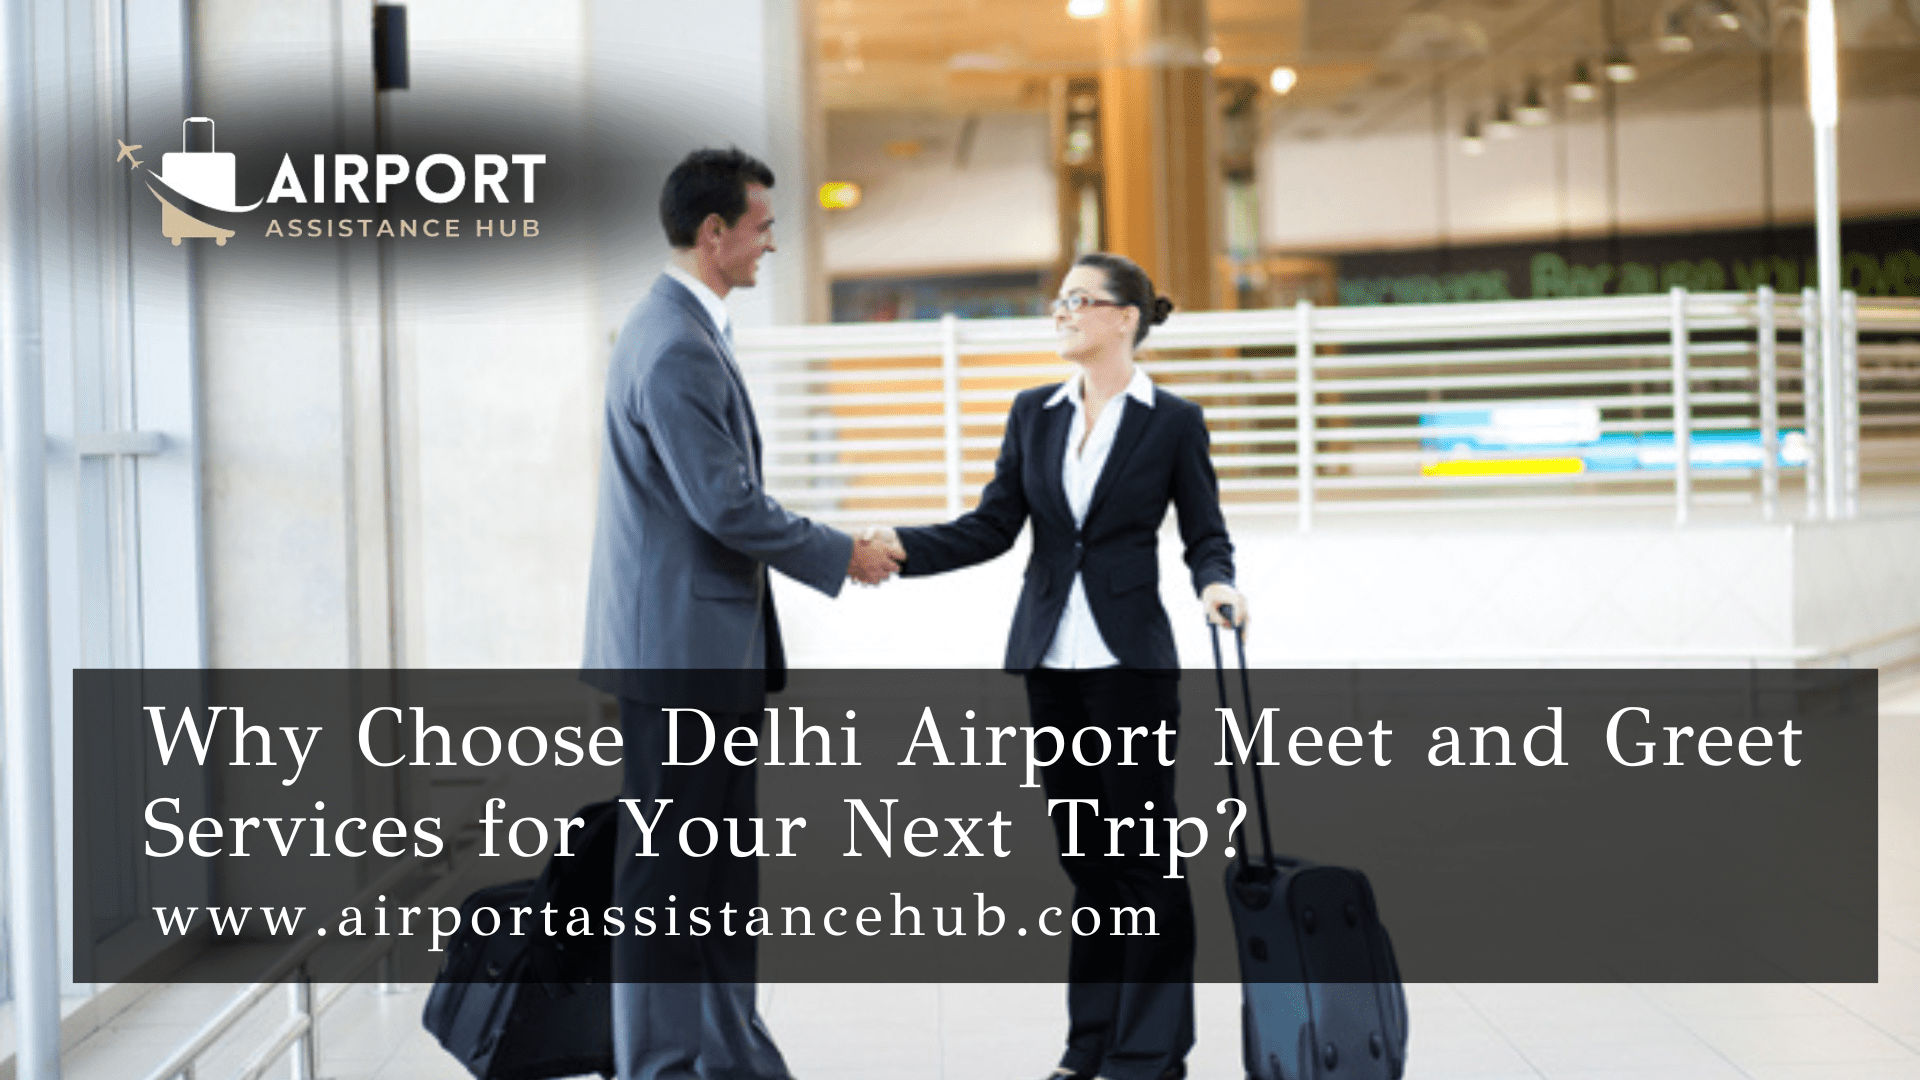 Why Choose Delhi Airport Meet and Greet Services for Your Next Trip?